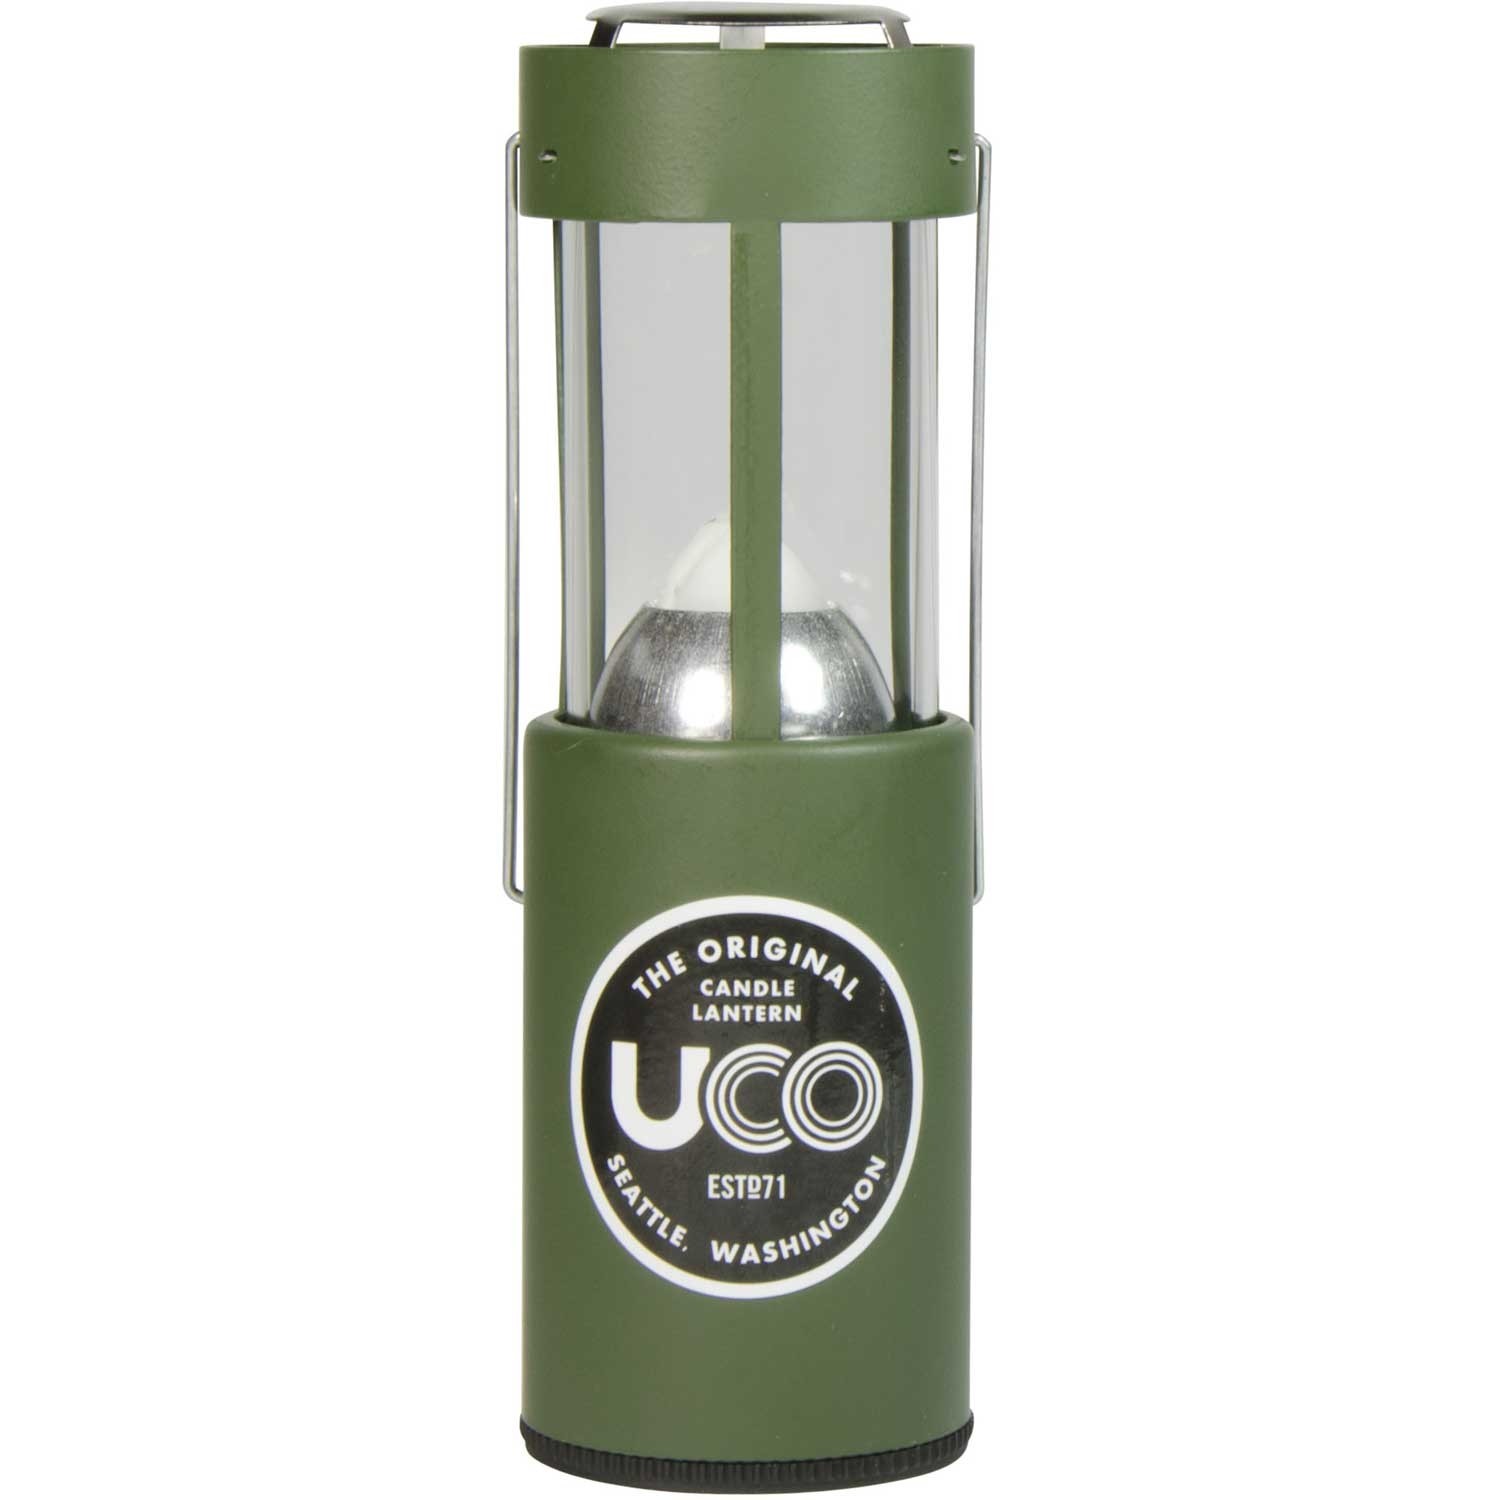 UCO 9 Hour Original Candle Lantern - Green - Open